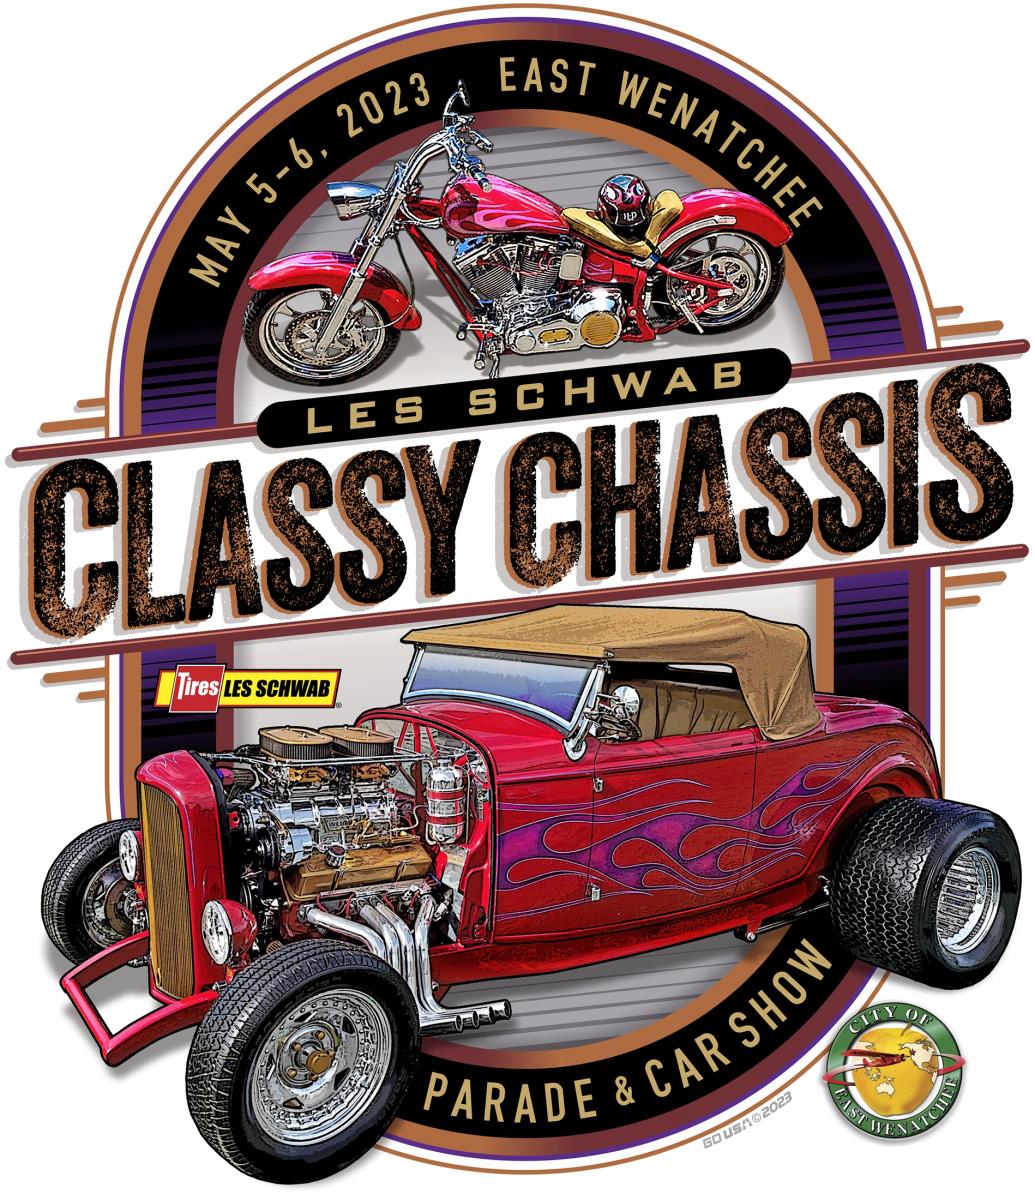 Classy Chassis Parade/ Car Show cover image